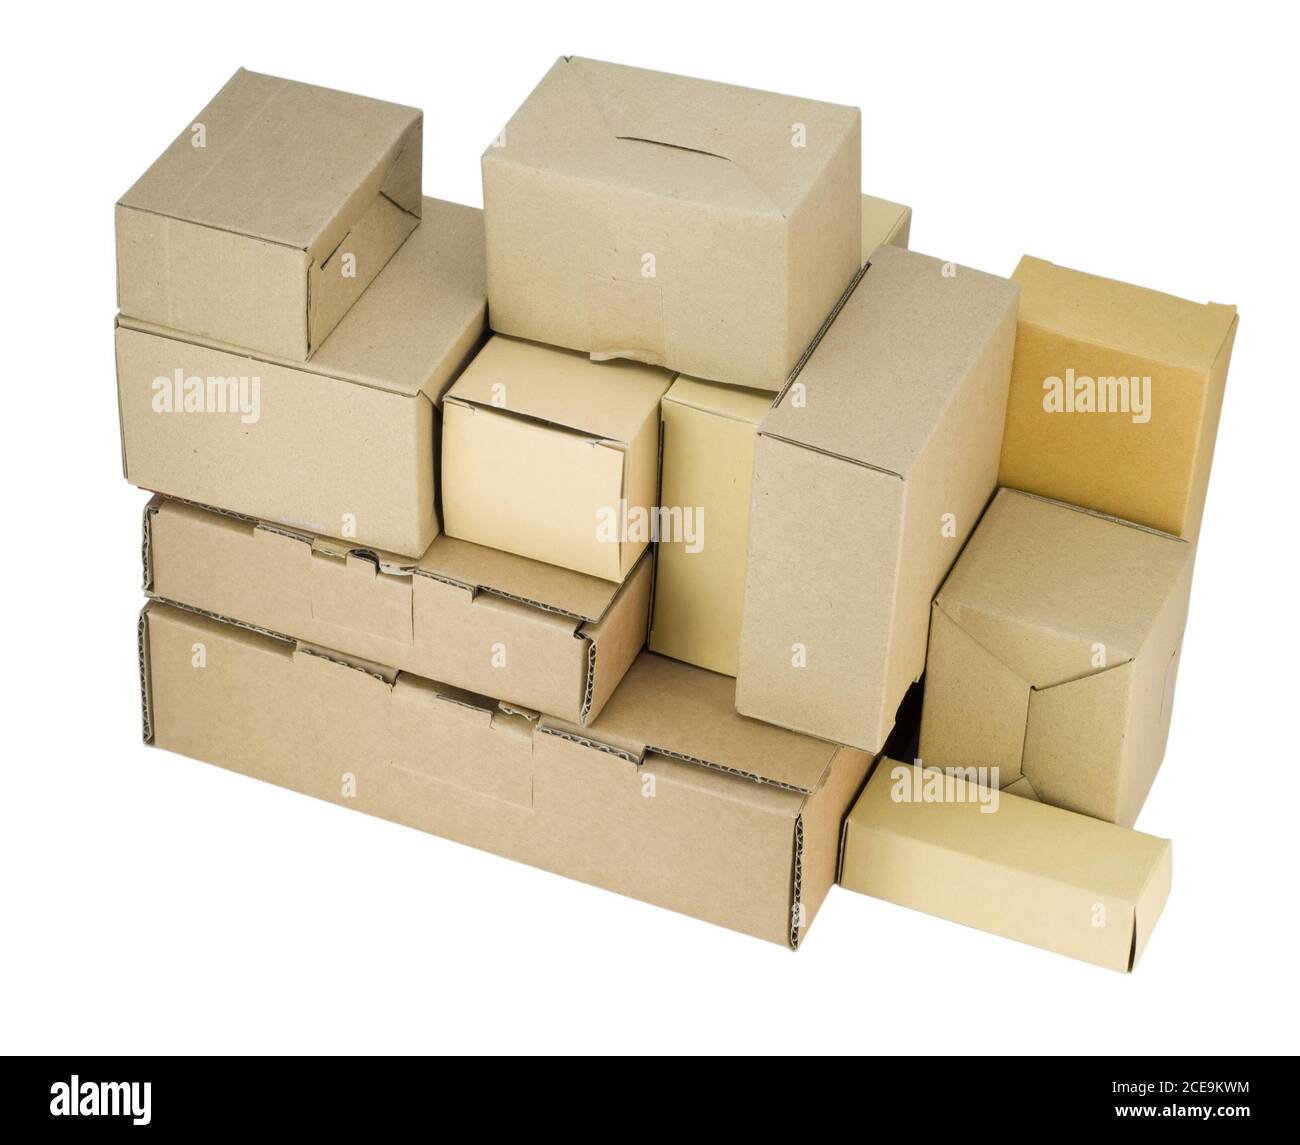 cardboard small boxes of industrial design Stock Photo